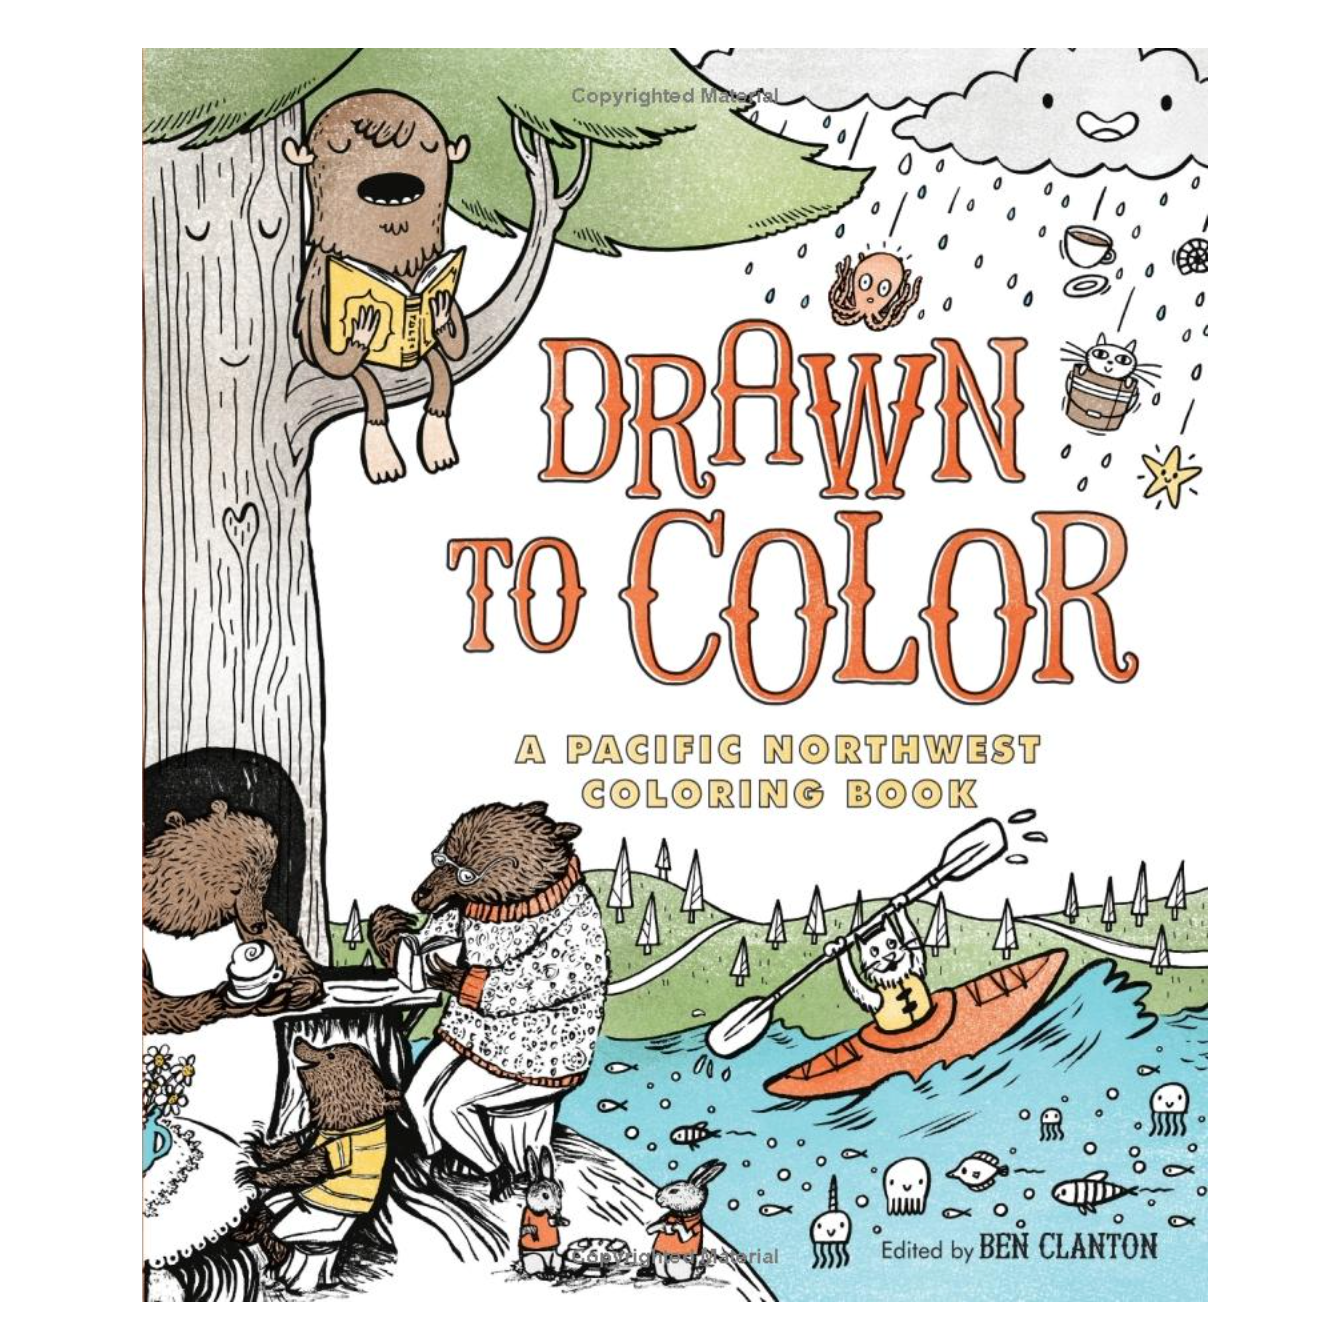 Drawn To Color - PNW Coloring Book